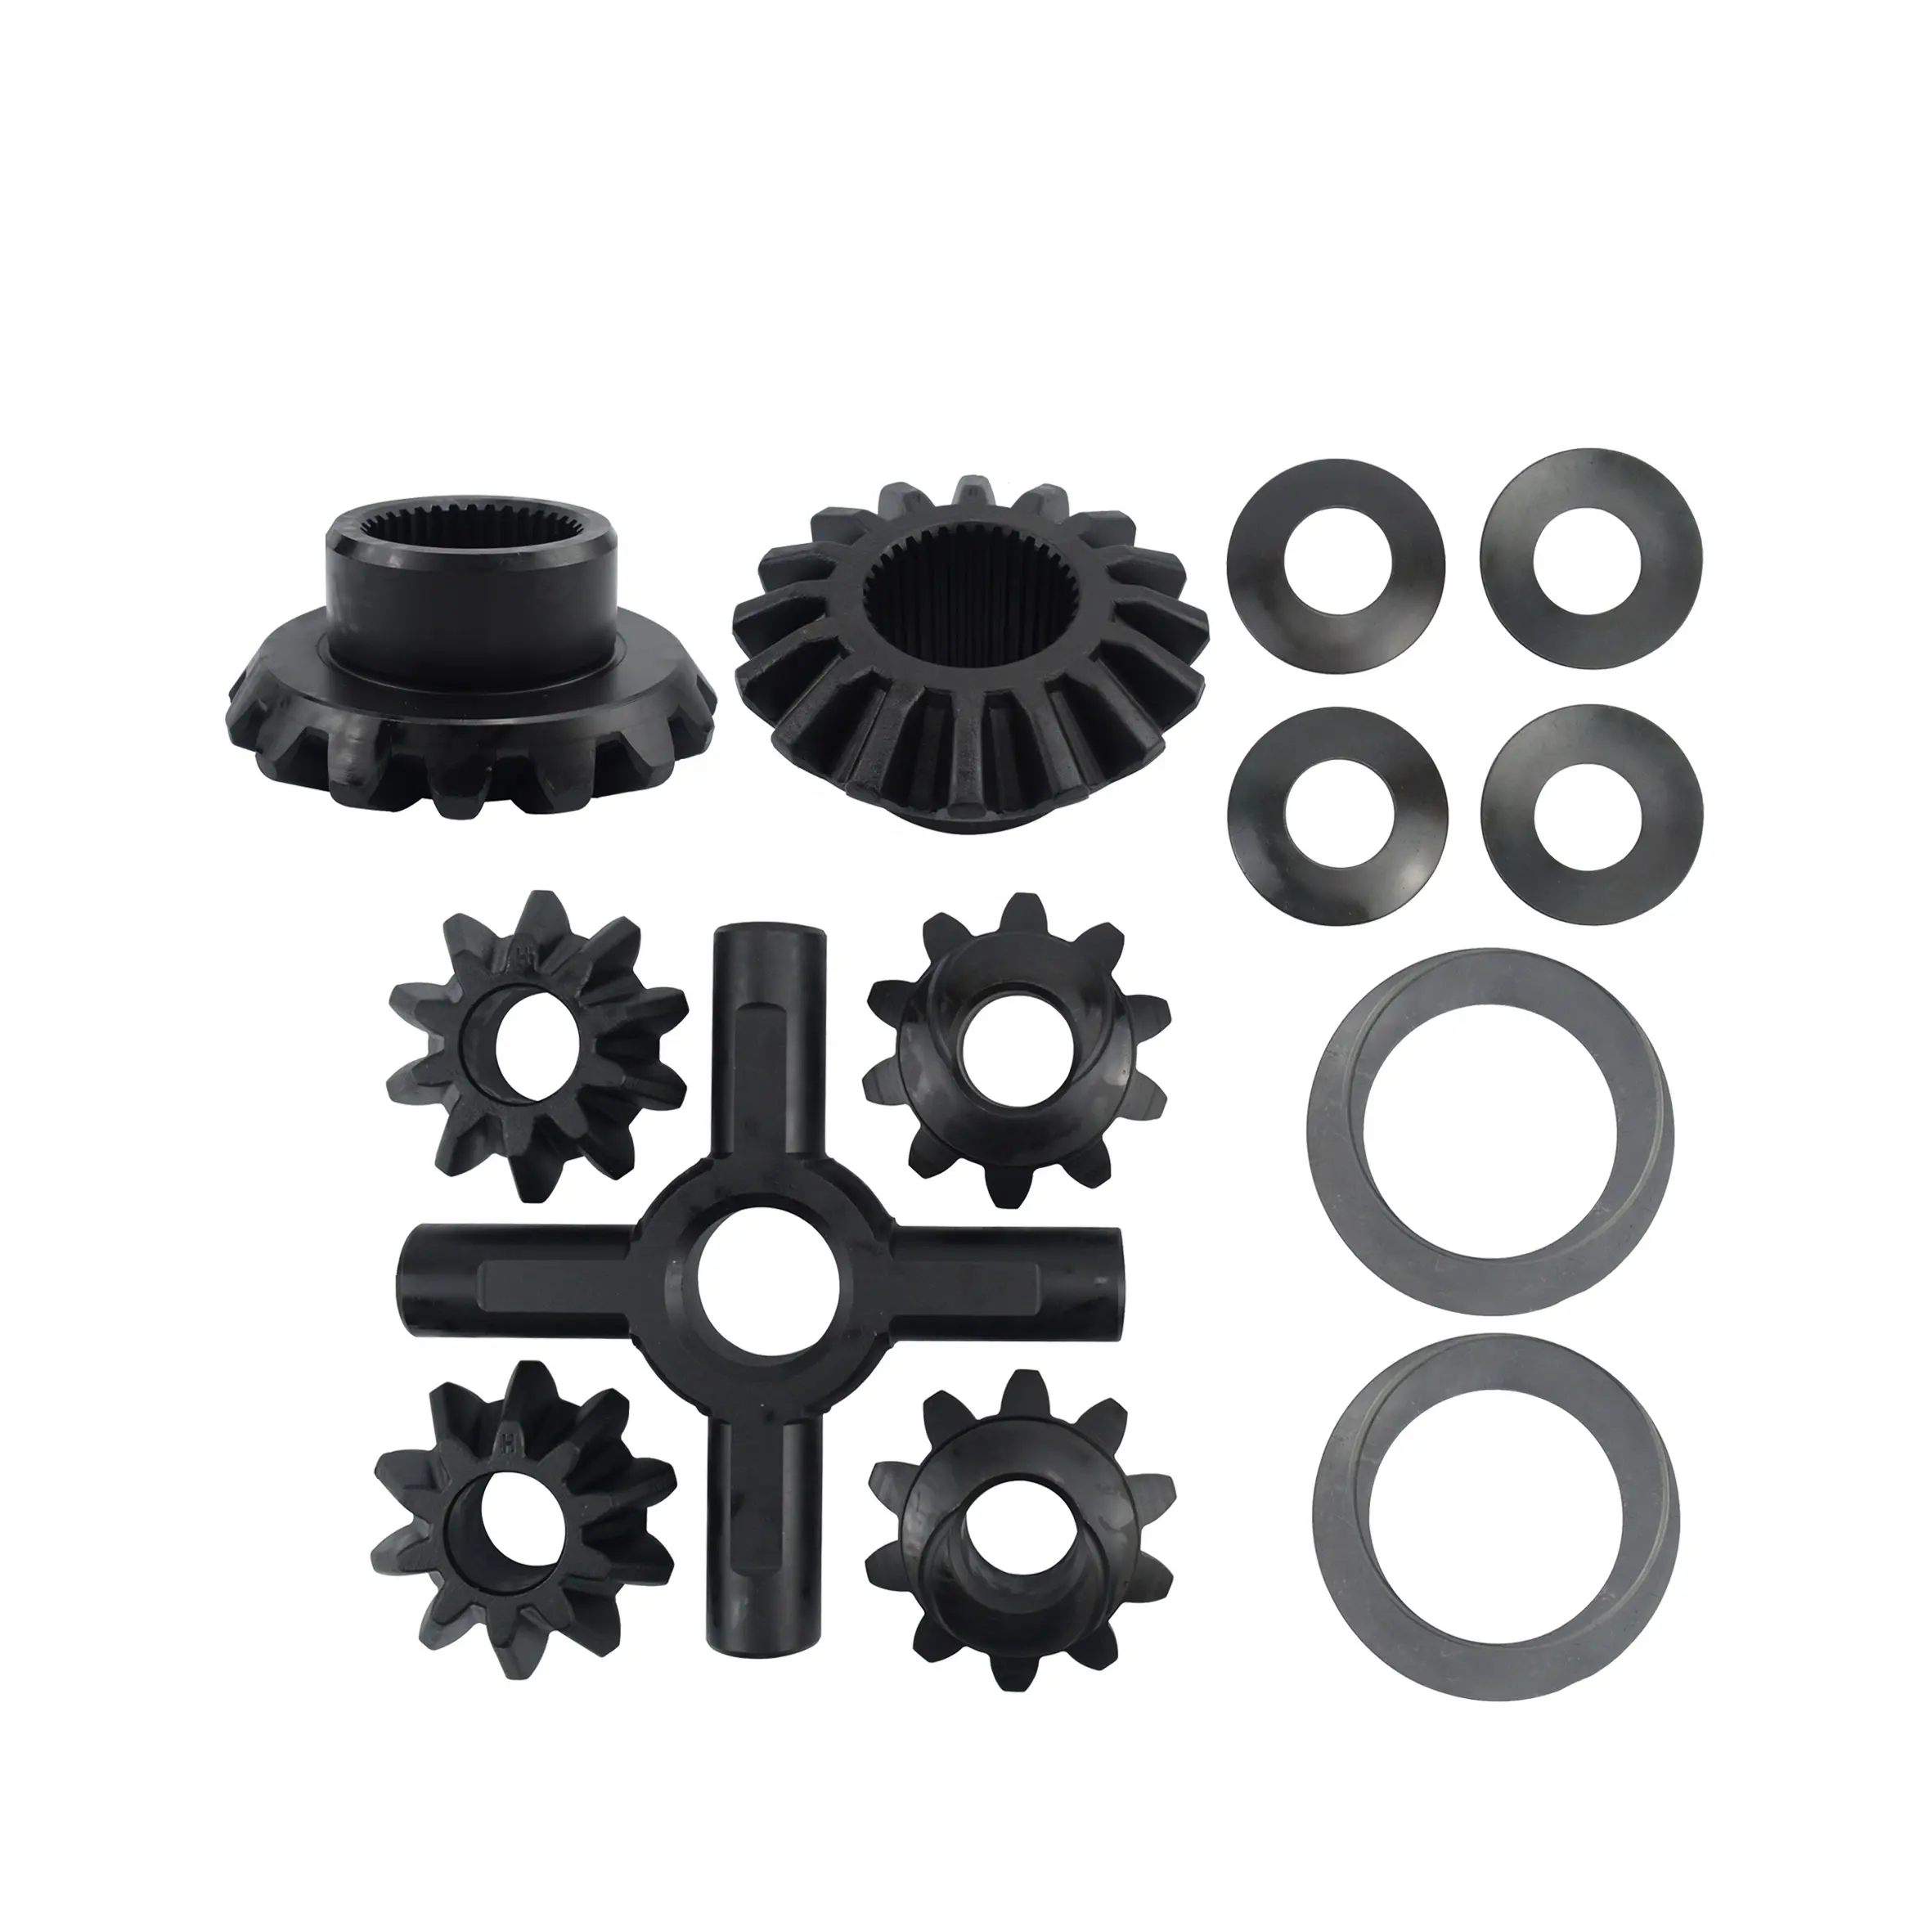 Planetary Gear Set Teile Differential Spider Repair Kit EQ-153 für Dongfeng Differential Spider Kit